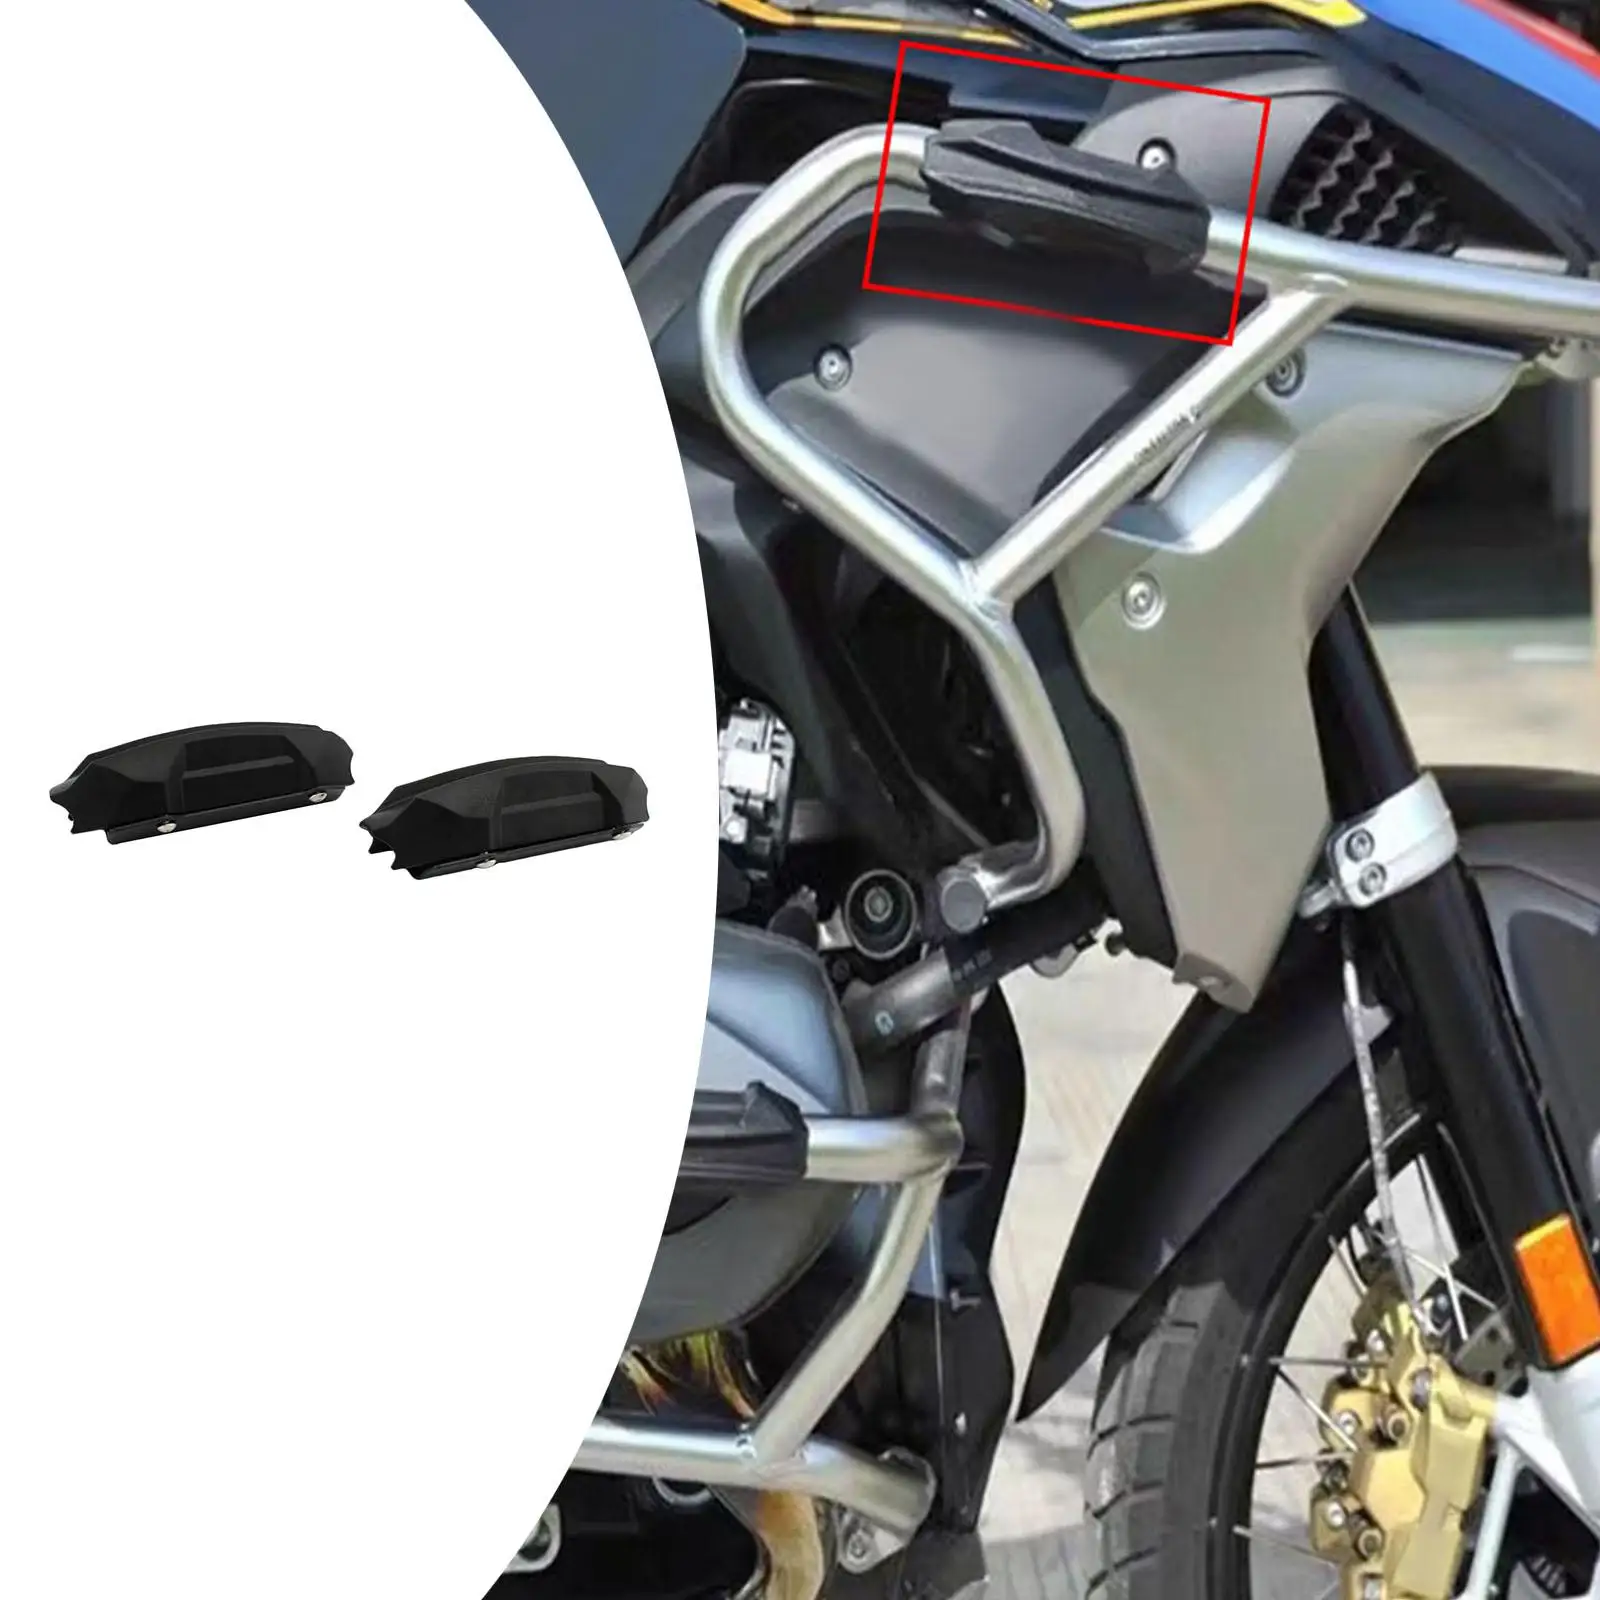  Motorcycle Engine Guard Bumper Engine Guard Replacement  Protective Cover for  R1250GS  F800GS F850GS Series